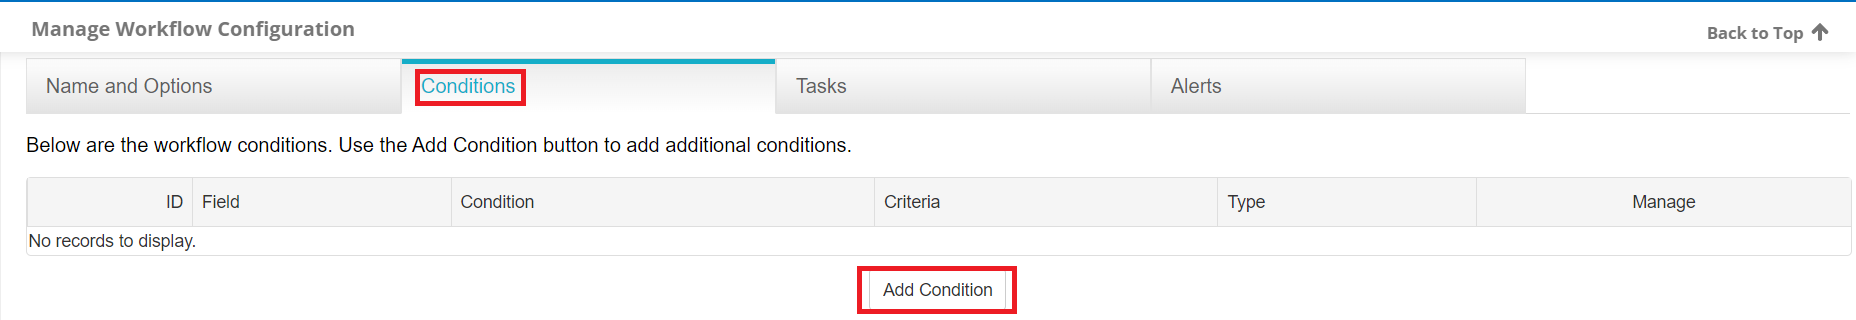 Conditions Tab